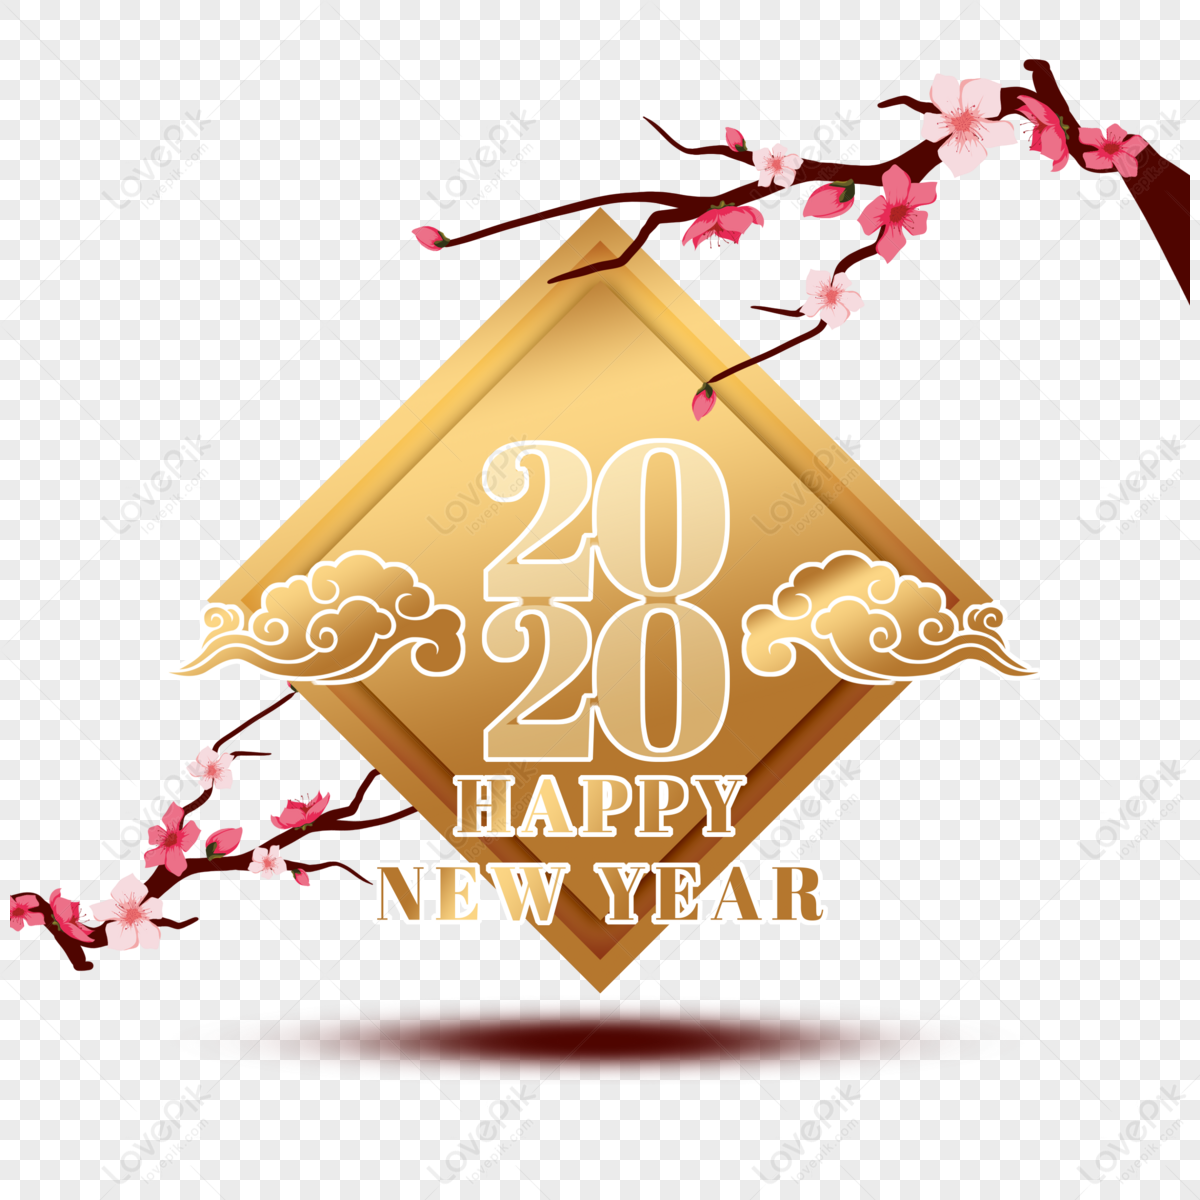 New Year PNG transparent image download, size: 432x432px